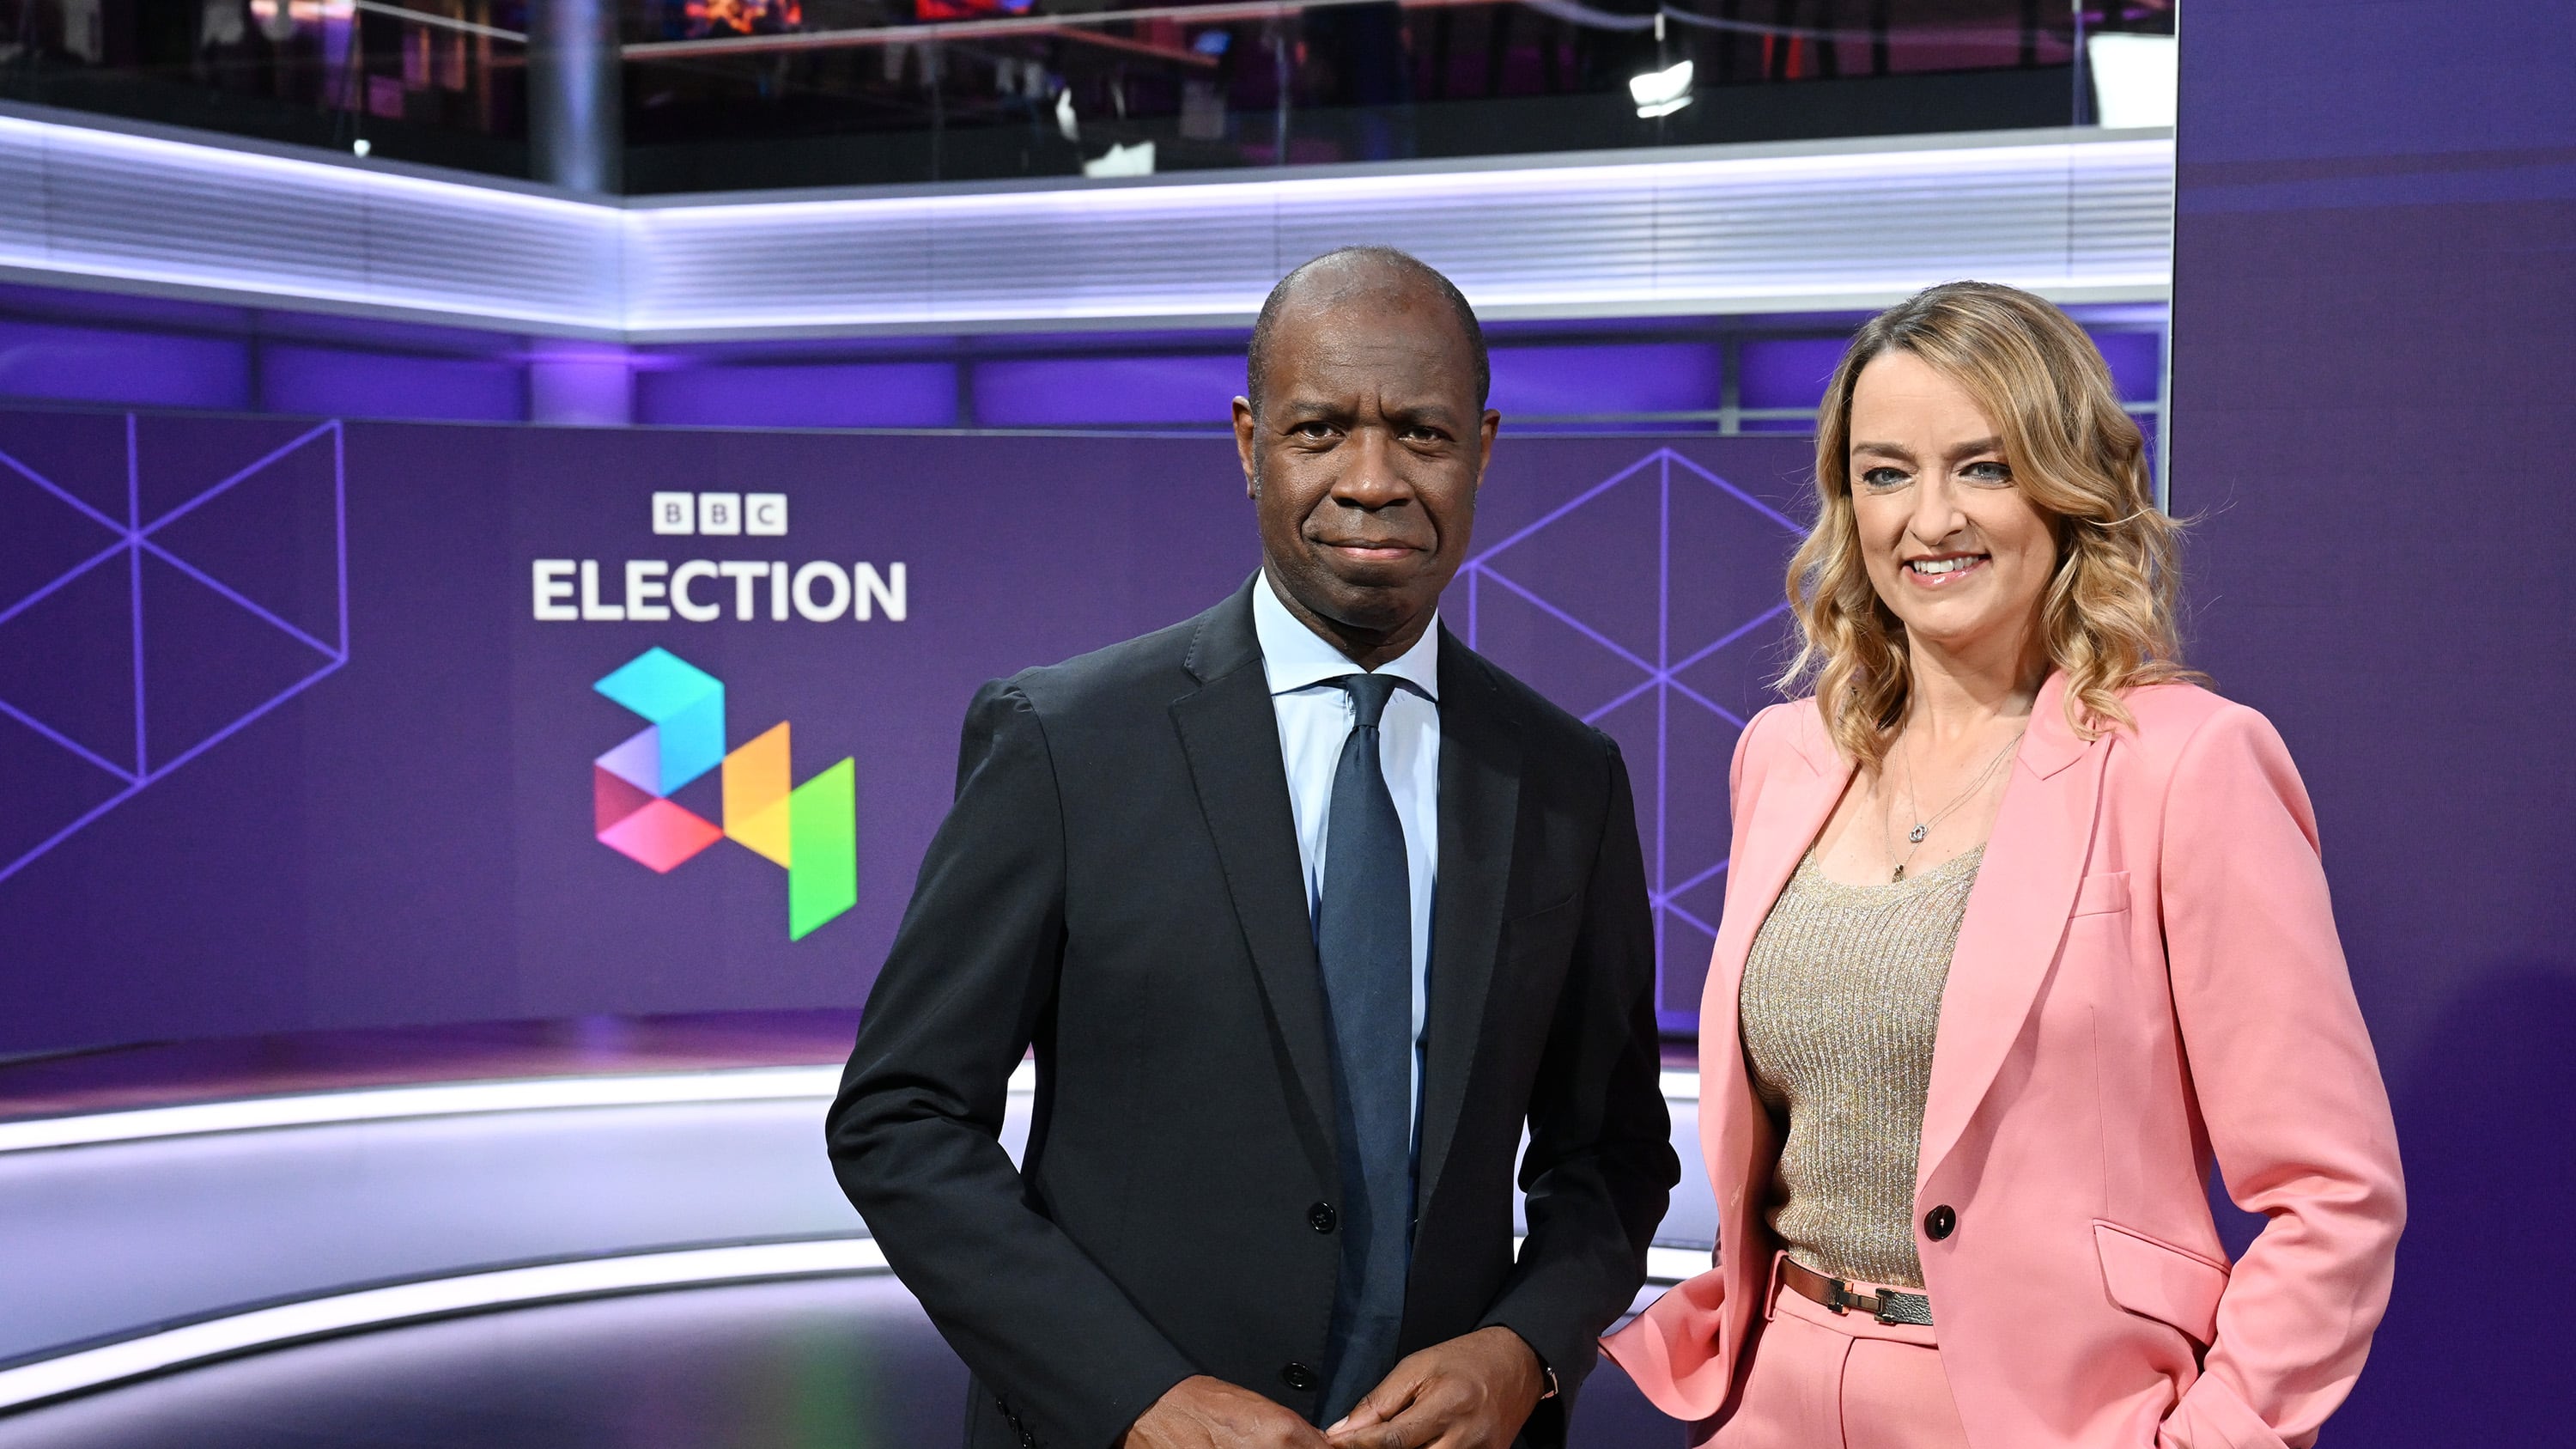 The BBC’s election coverage will be headed up by Clive Myrie and Laura Kuenssberg